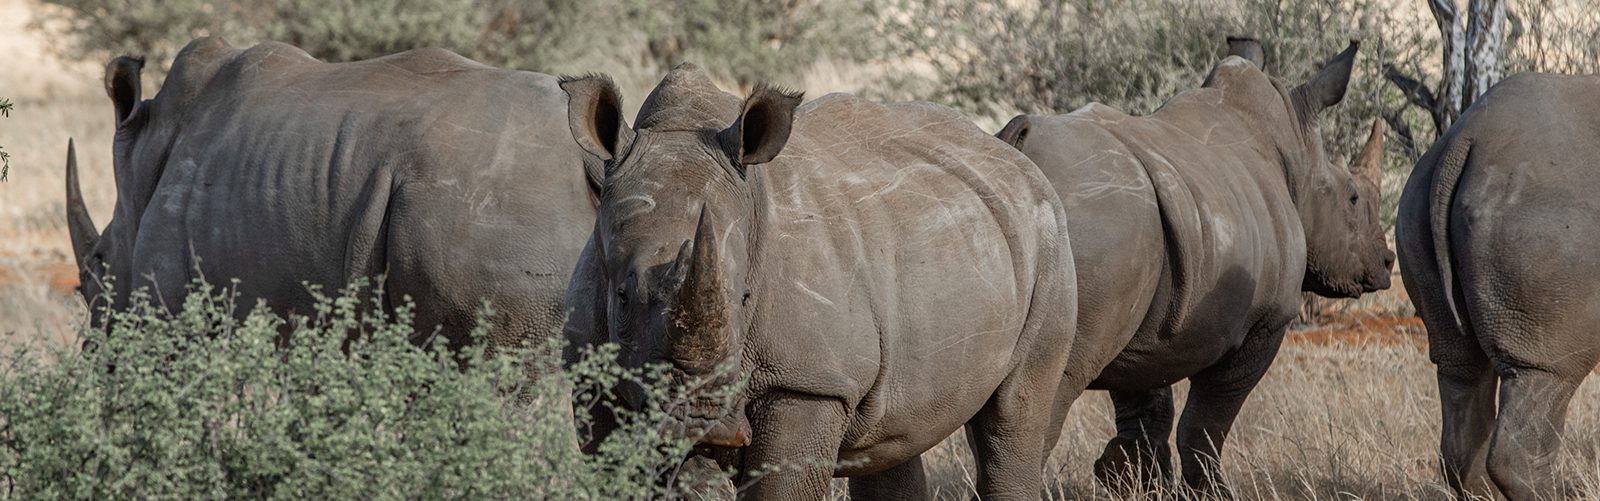 Save the rhinos become a partner at the rhino sanctuary Namibia.